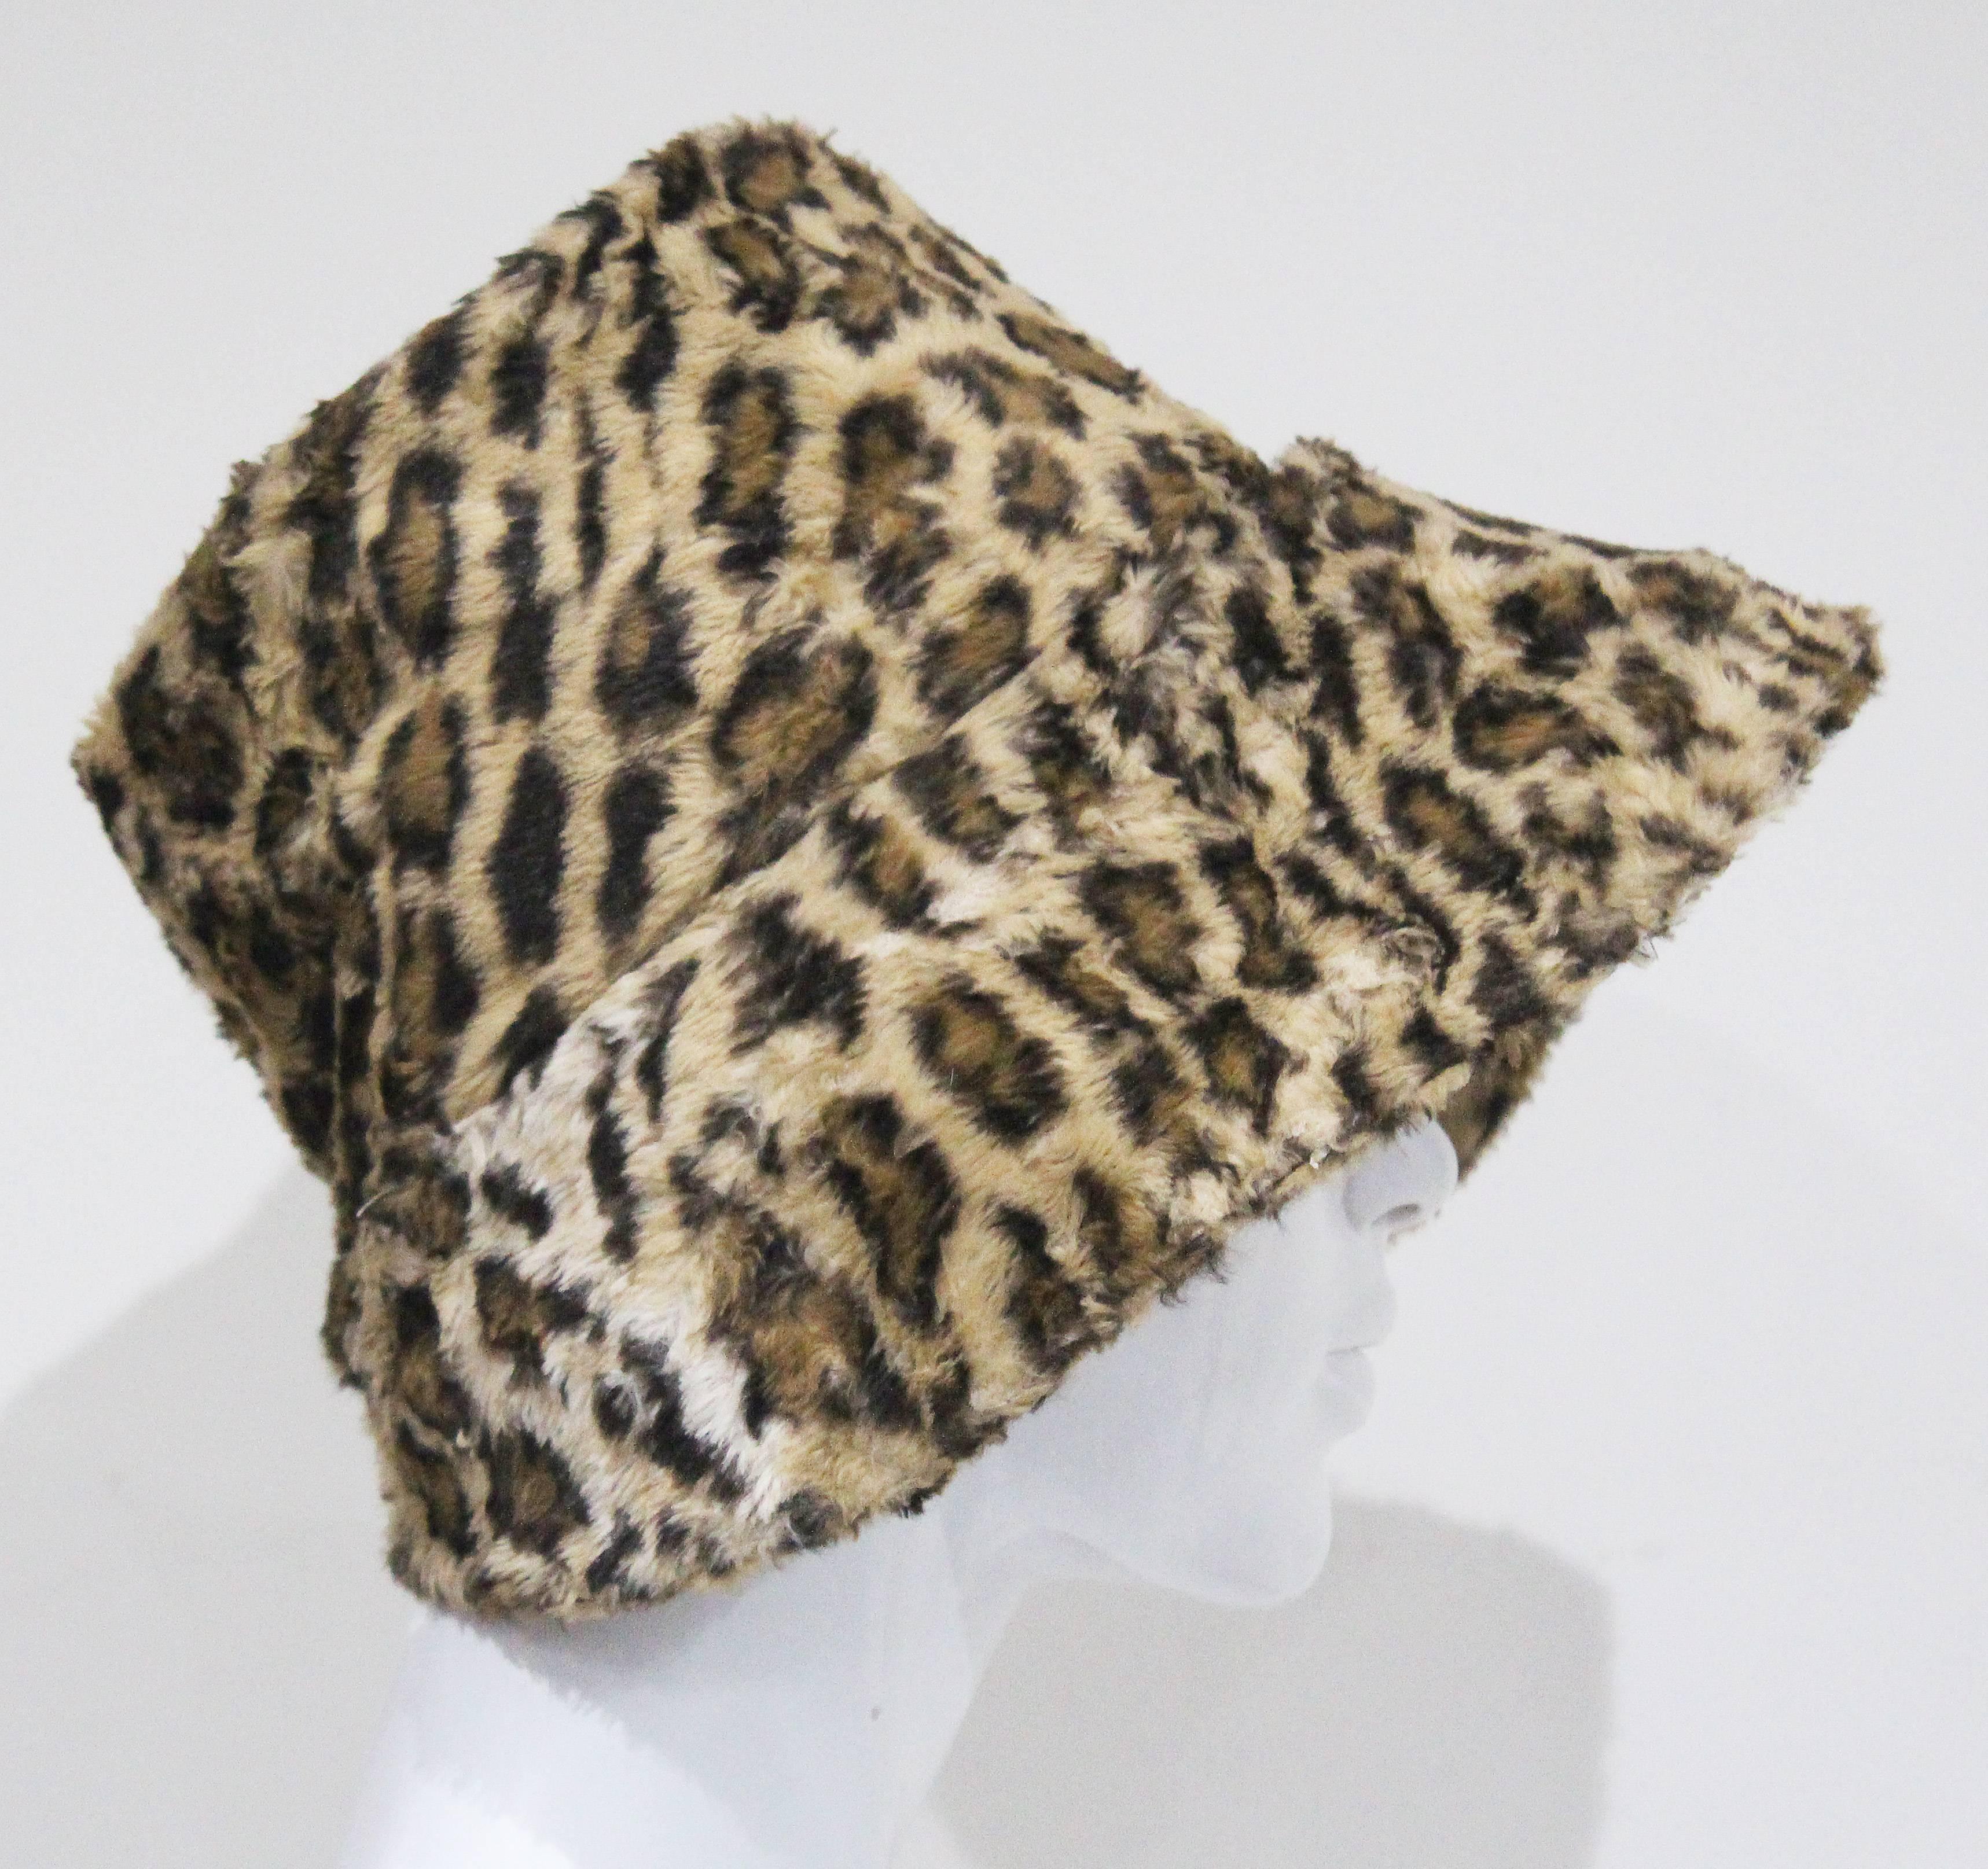 A Norma Kamali faux fur hat in a leopard print made in the 1990s. 

Medium

New with tags